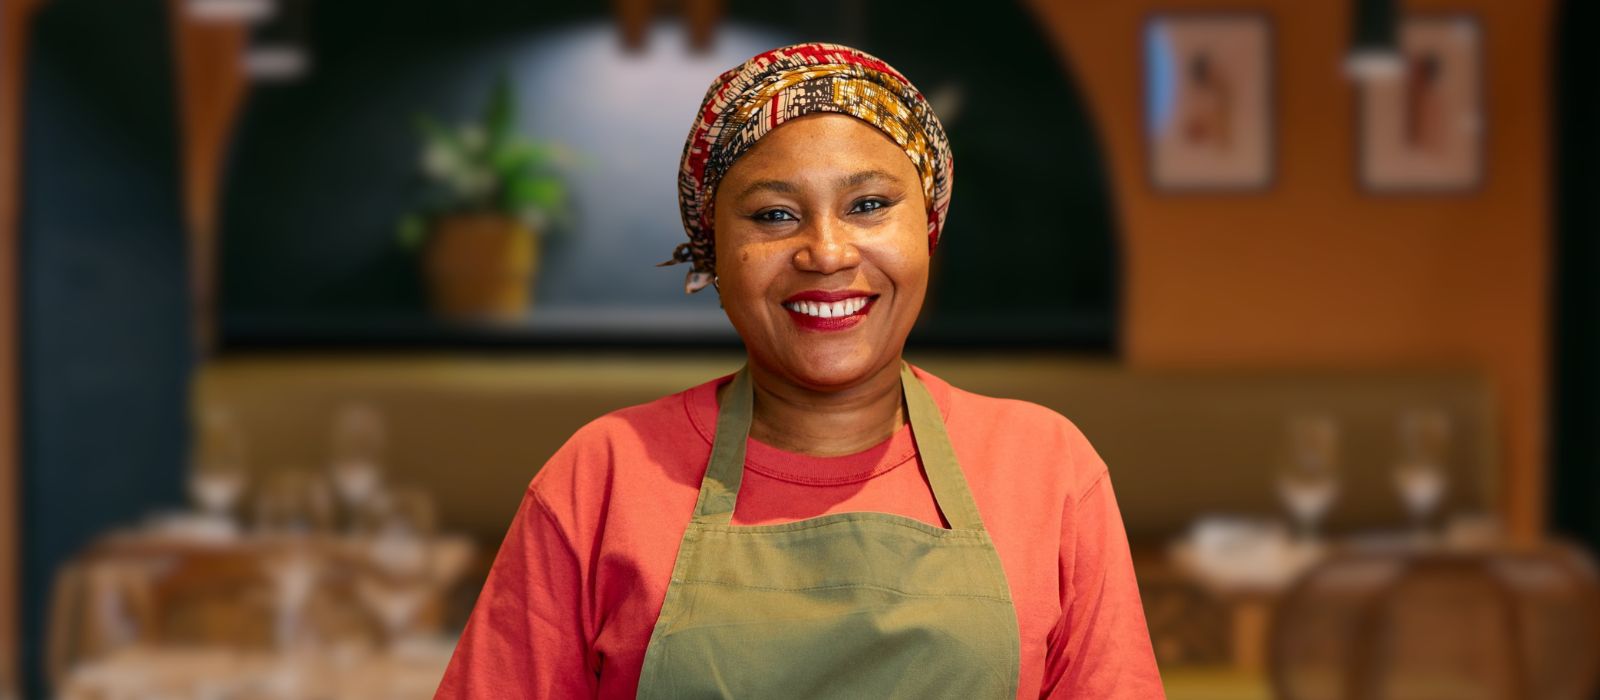 Adejoke, the first black female chef to be awarded a Michelin star